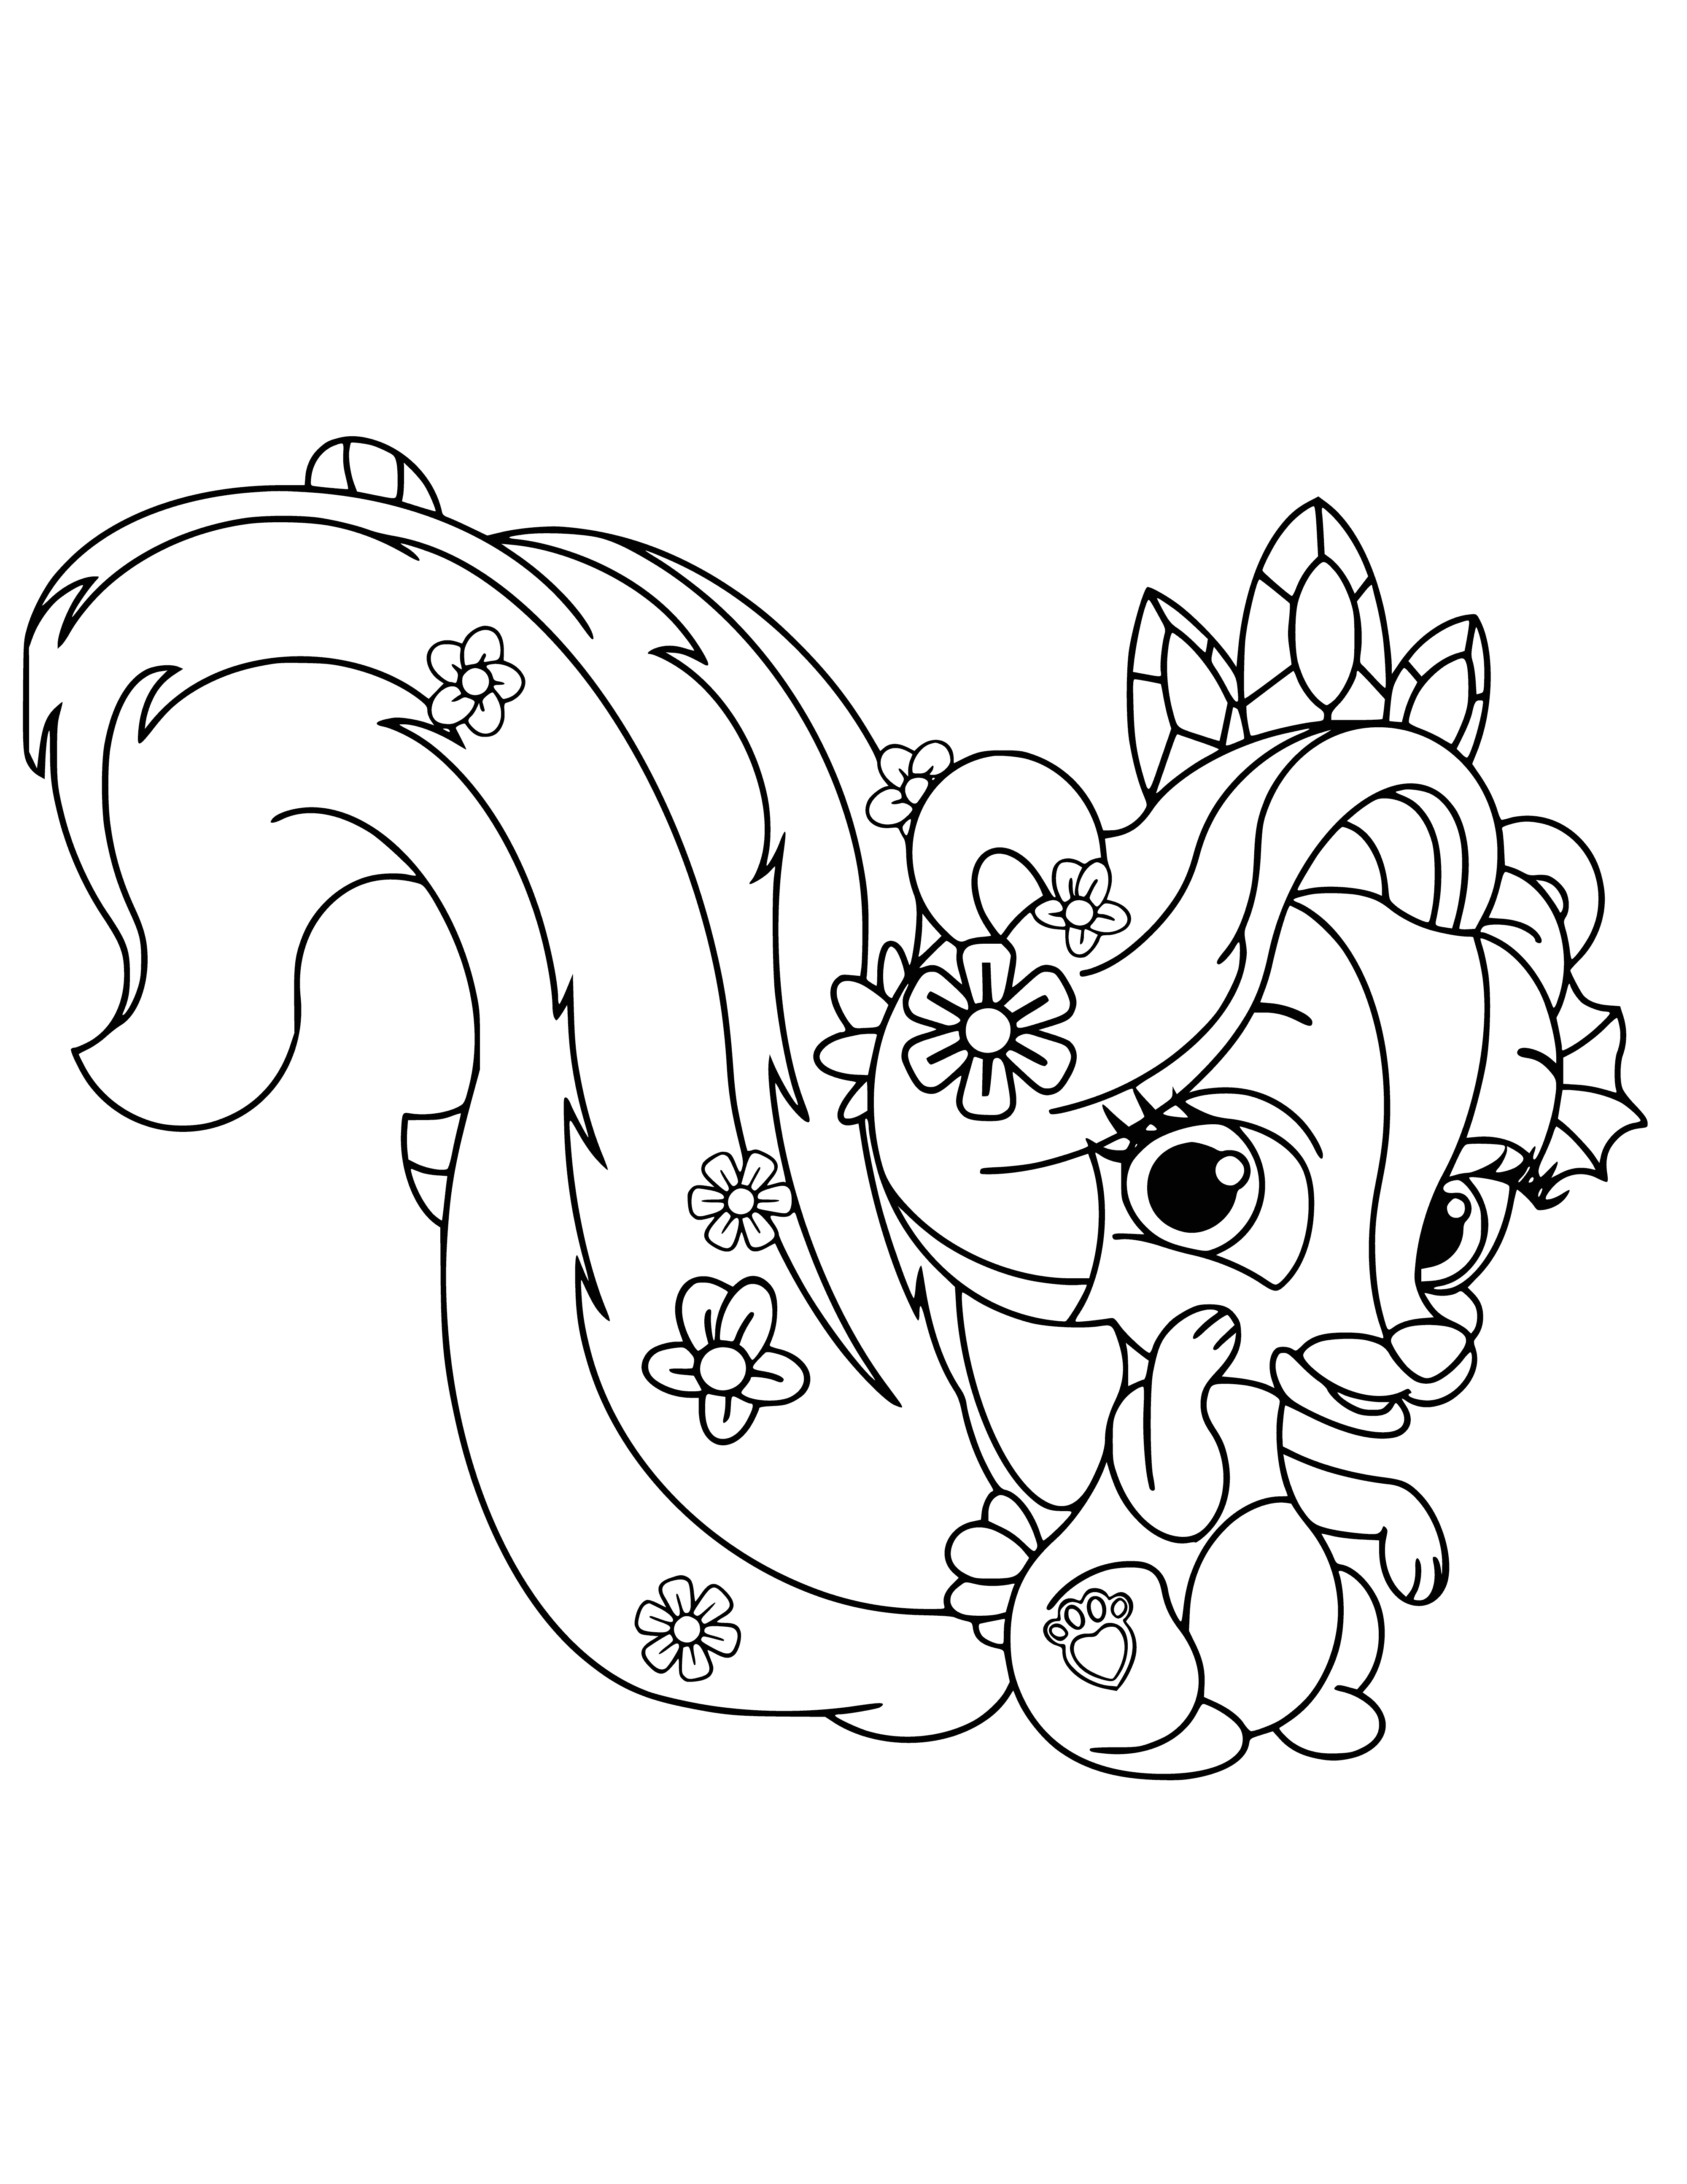 coloring page: Skunk Polyanka & a chameleon w/ yellow spots, long tail & black eyes are Rapunzel's pets. Polyanka's wearing a red collar with gold tag.